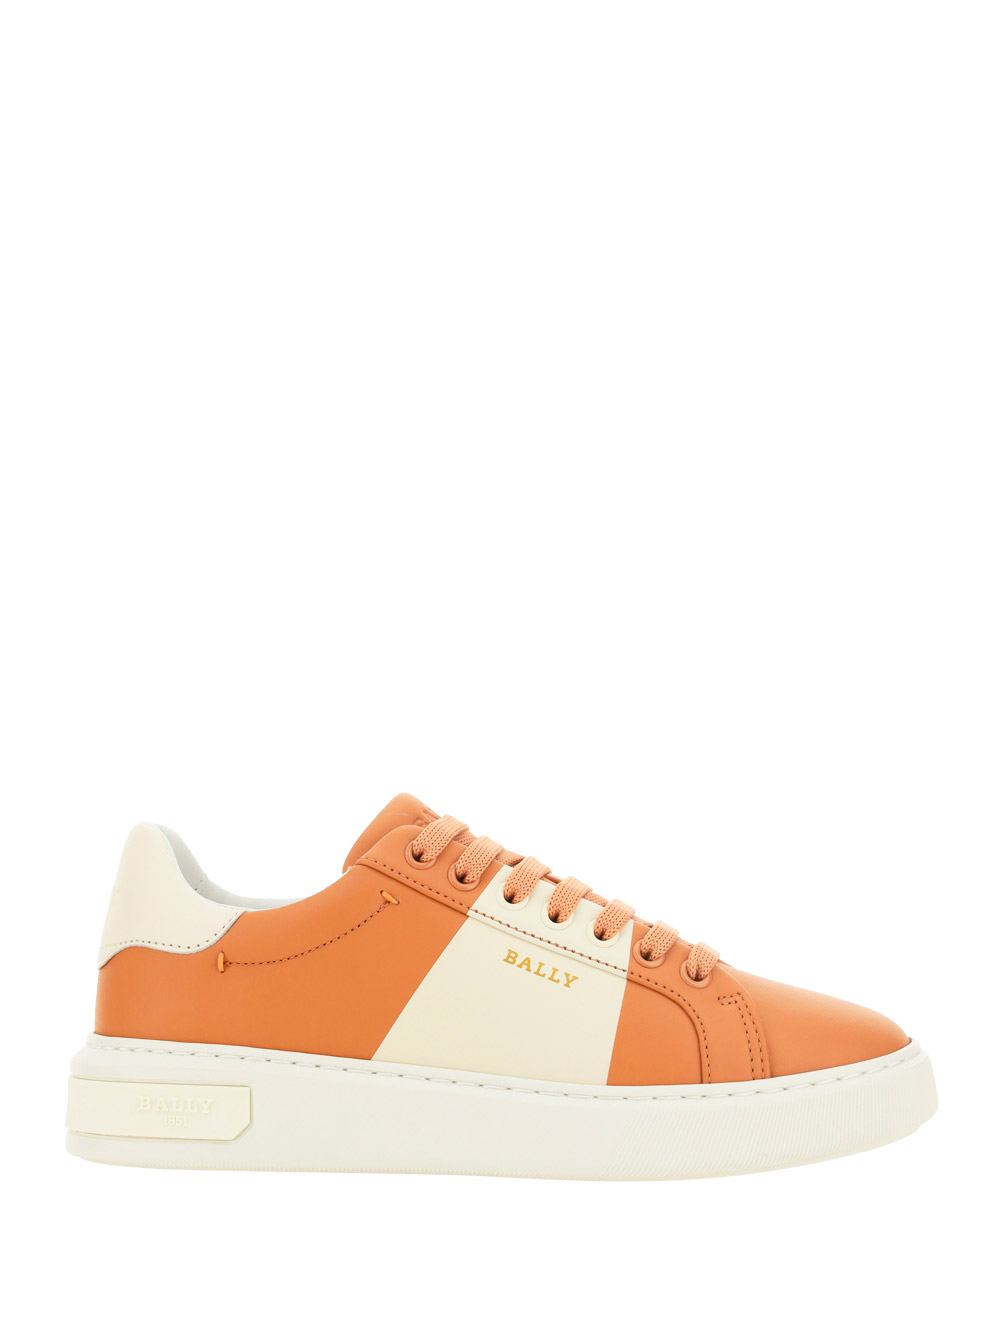 Bally Sneakers Mitty In Orange